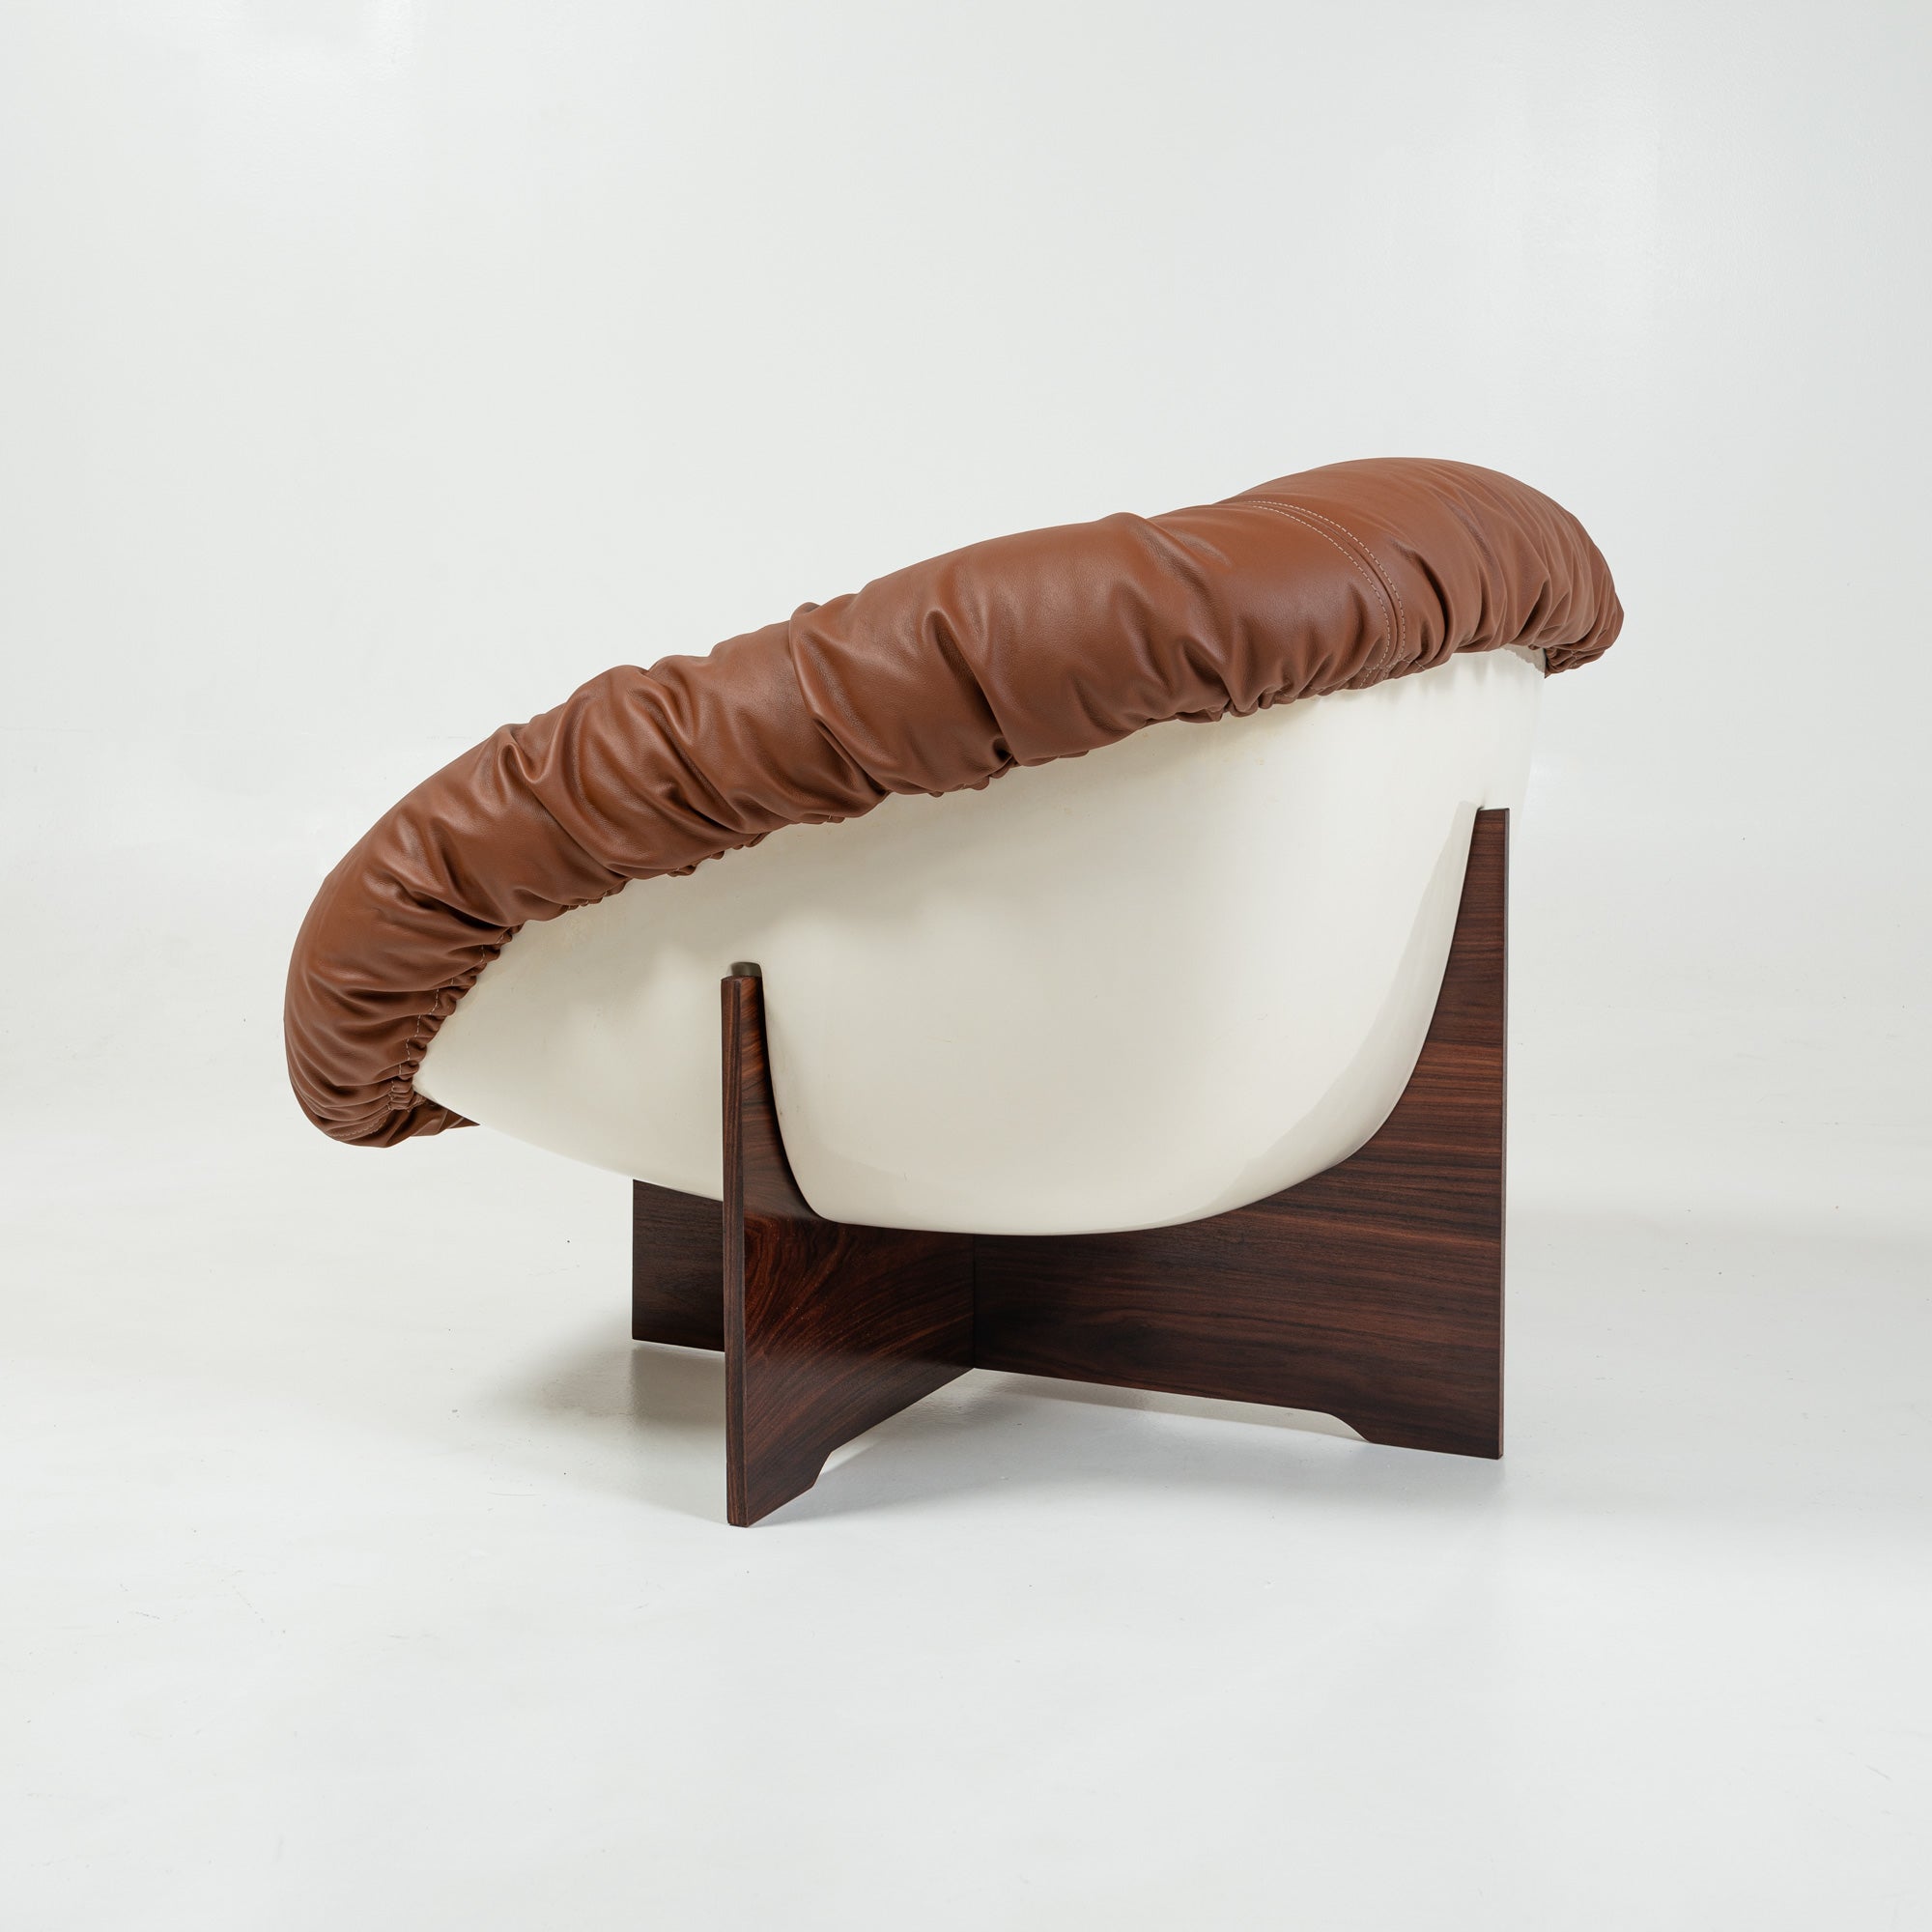 Percival Lafer's MP-61 Lounge Chair in Maharam Leather and Rosewood, 1973